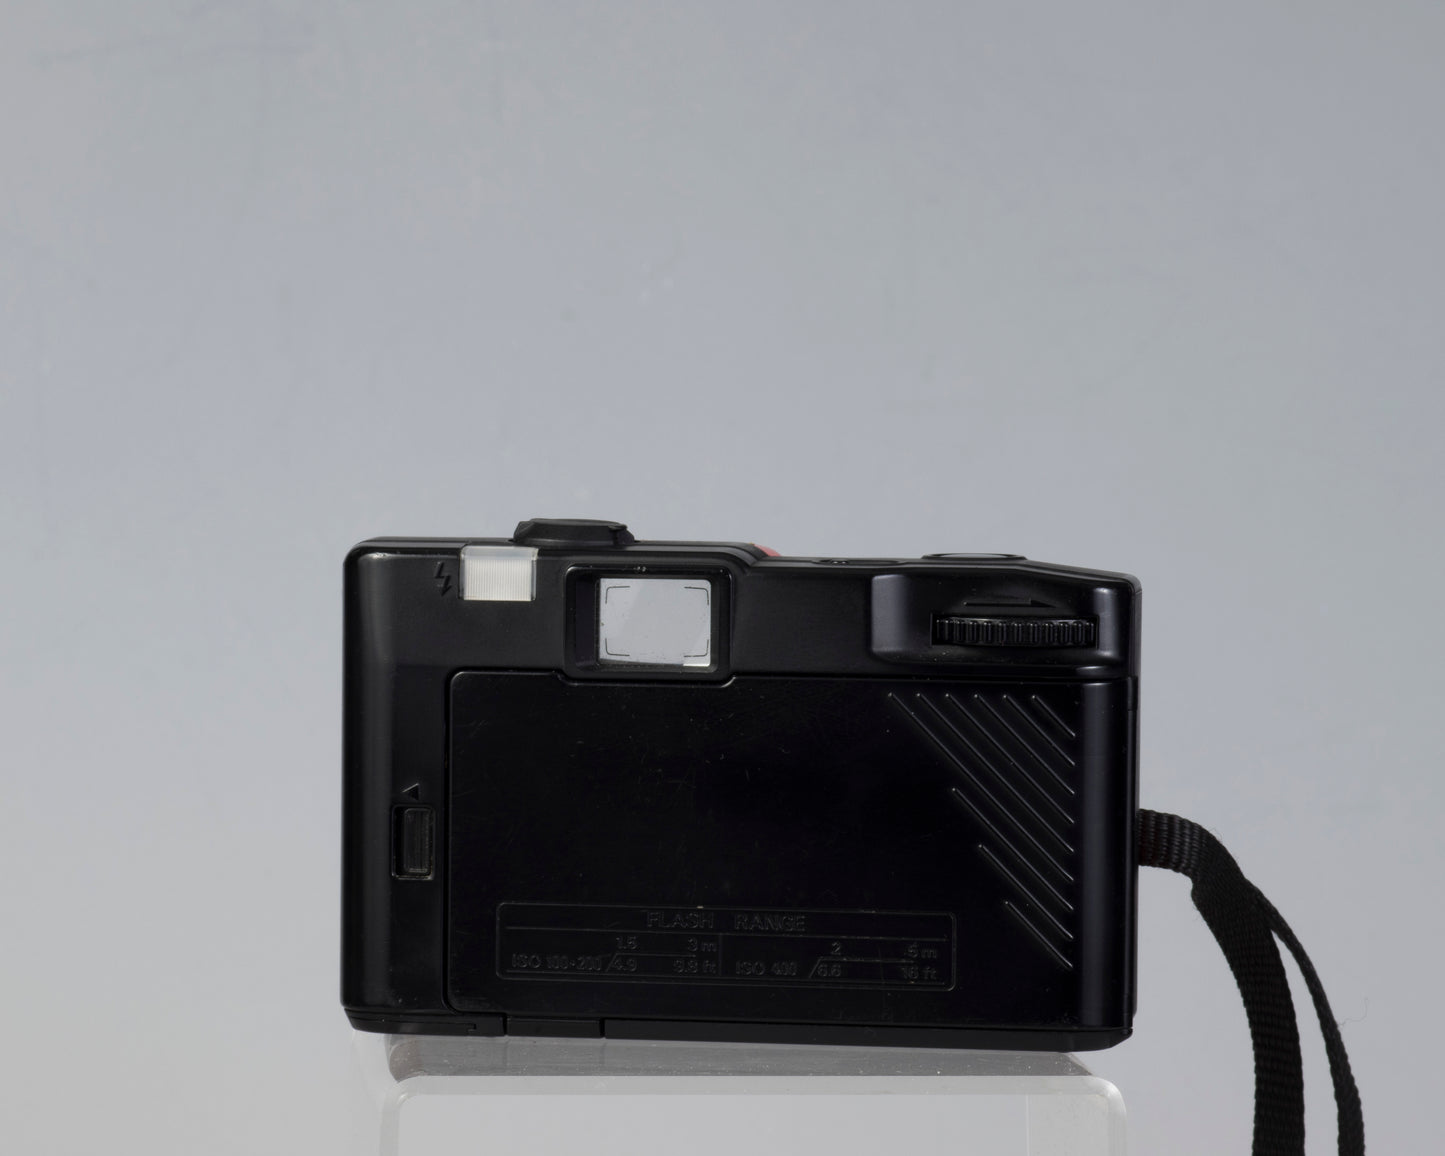 Konica EFP-3 35mm point-and-shoot camera (serial 354020)